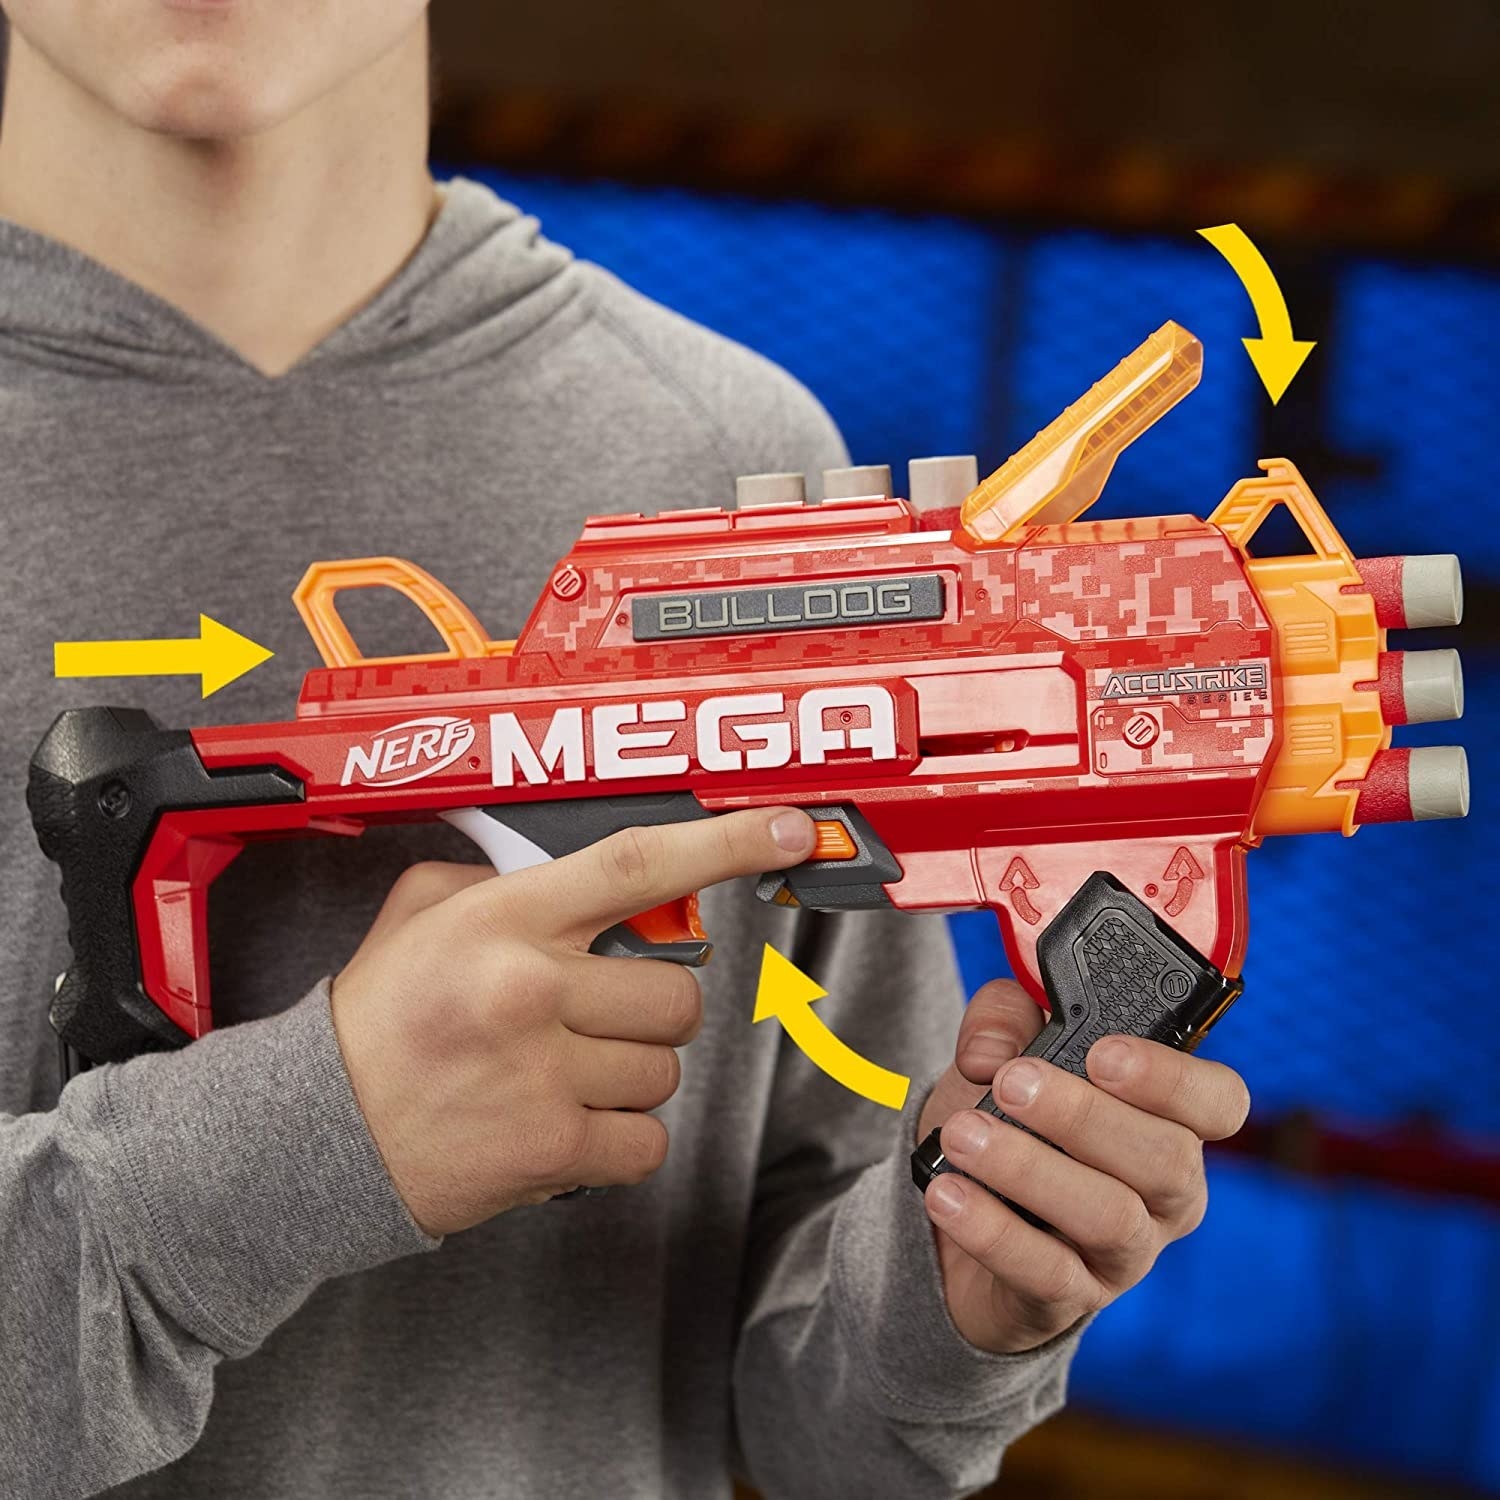 A person holding the Nerf gun